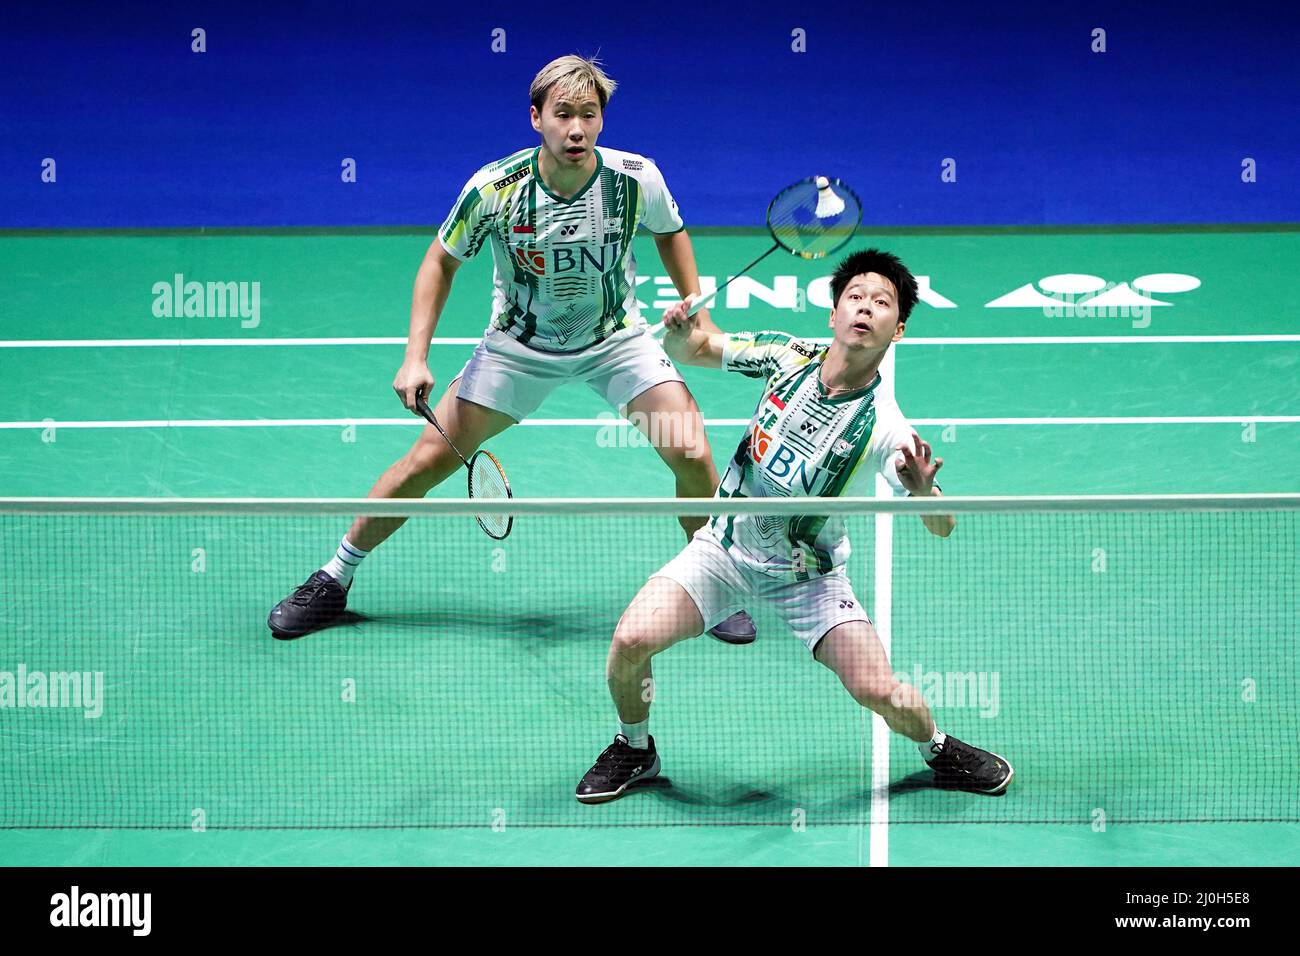 Indonesias Marcus Gideon, right, and Kevin Sanjaya Sukamuljo compete against Britains Ben Lane and Sean Vendy during their mens doubles badminton match at the 2020 Summer Olympics, Saturday, July 24, 2021, in